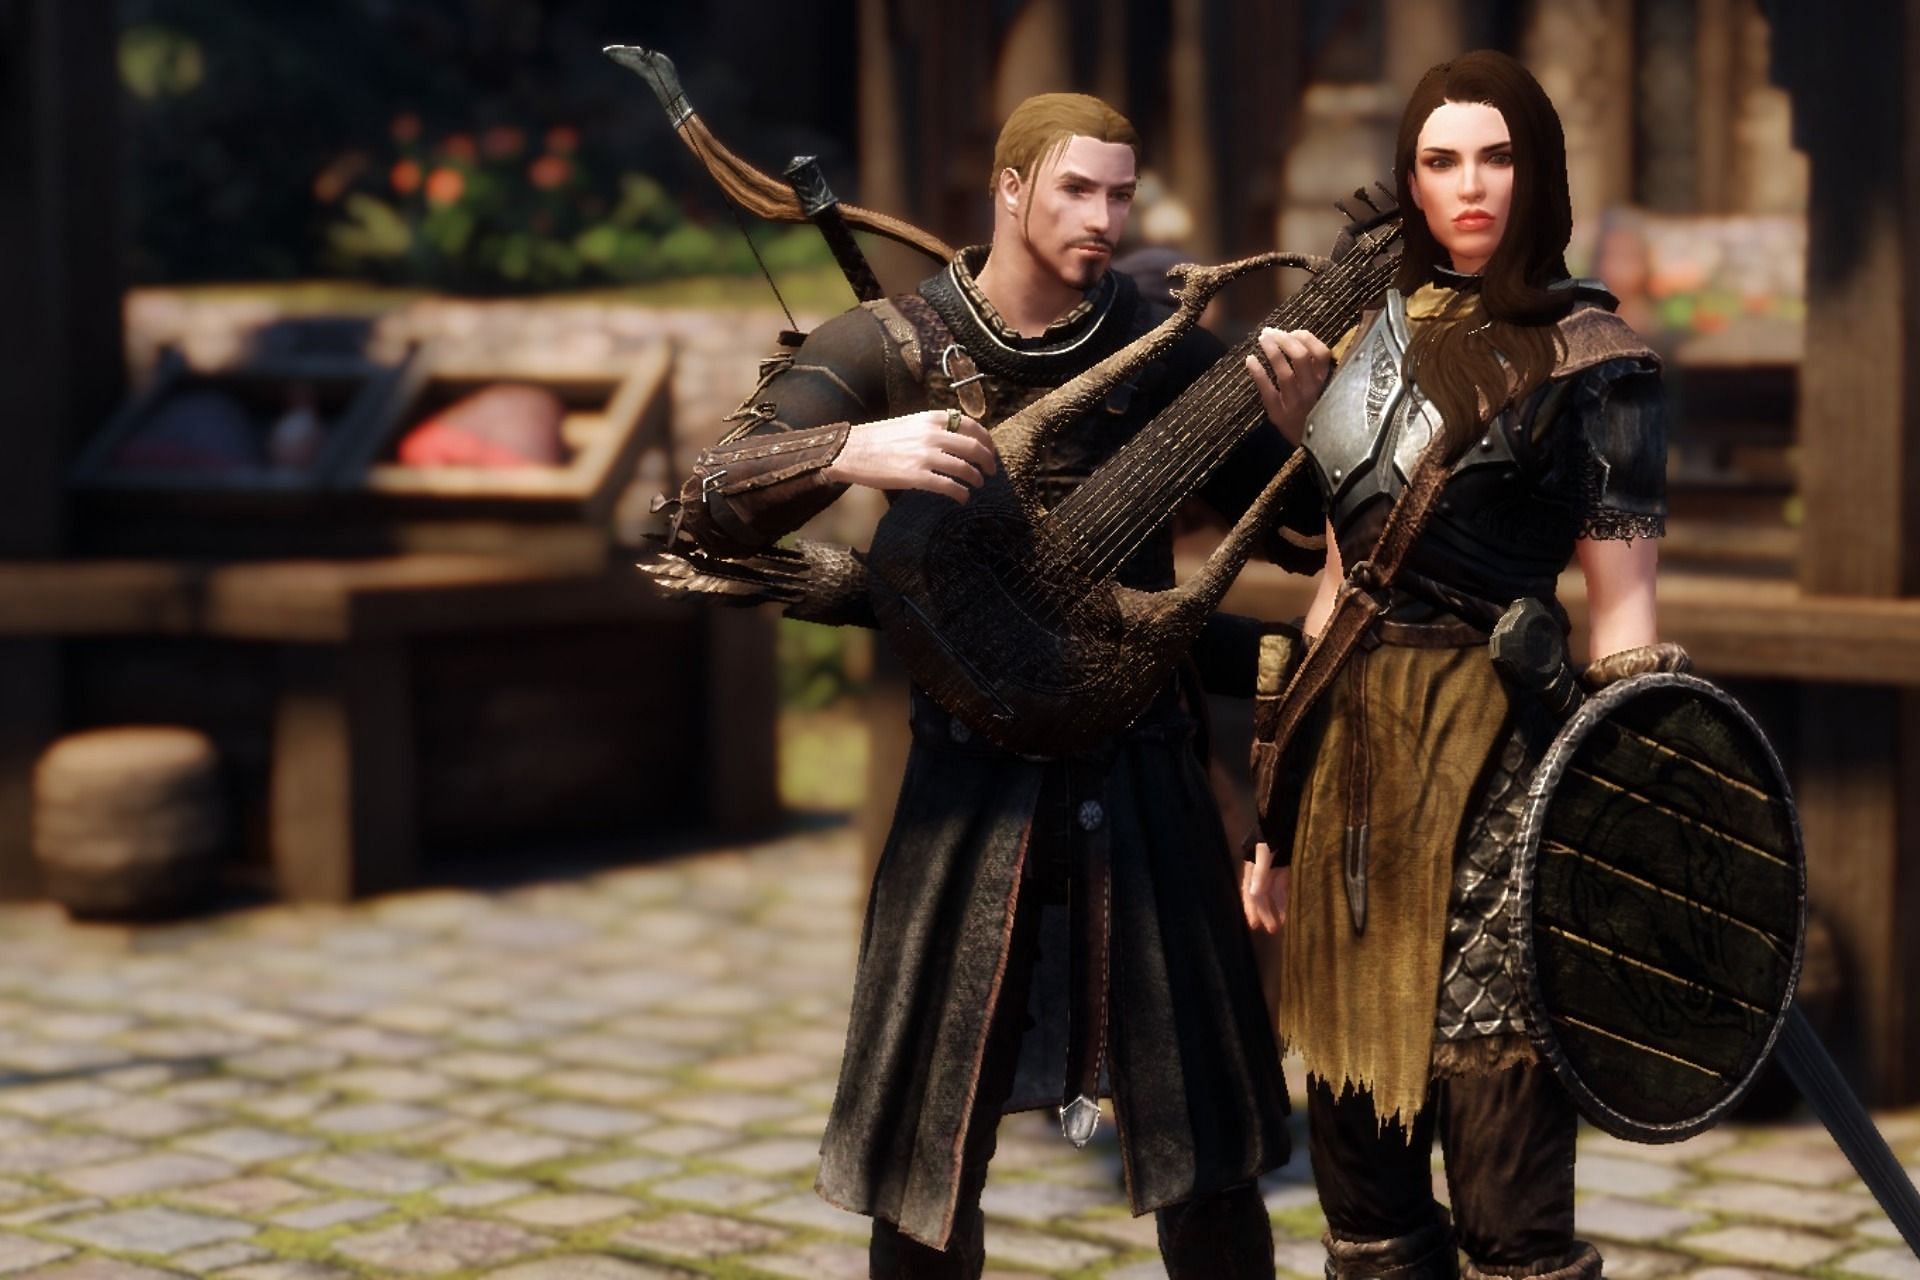 Oblivion had the provision of niche class builds like bards (image via Nexusmods)